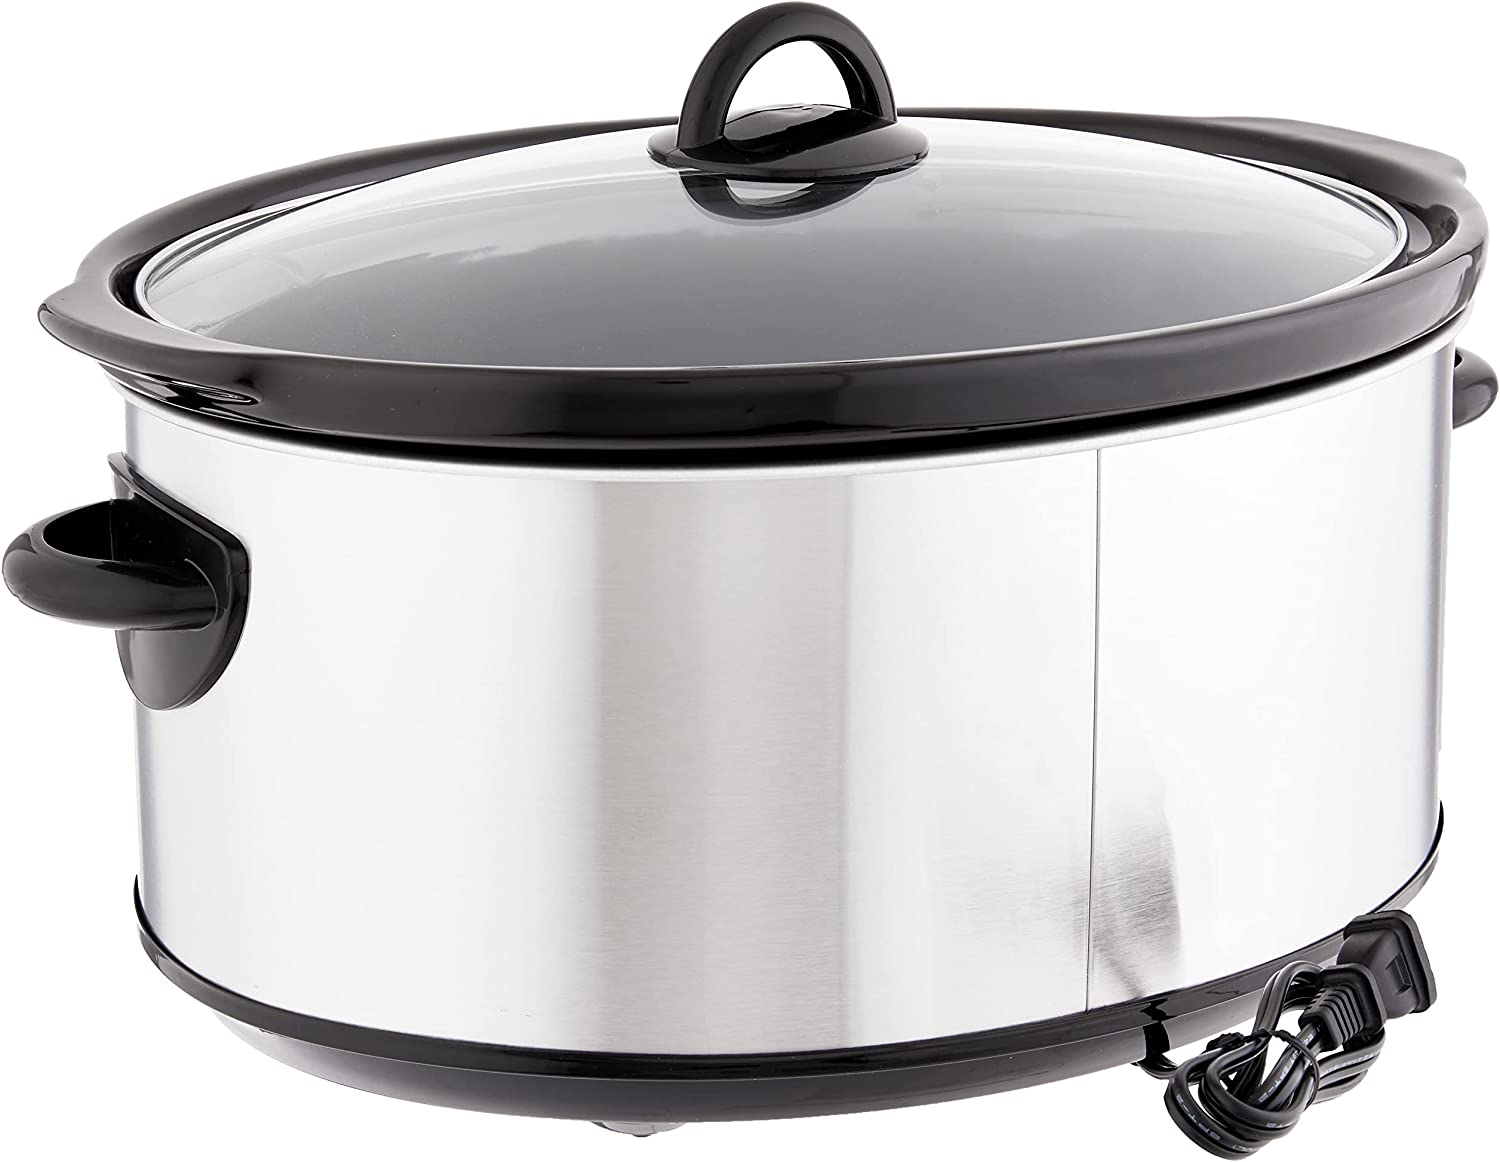 https://discounttoday.net/wp-content/uploads/2022/11/Crock-Pot-SCV803-SS-Large-8-Quart-Slow-Cooker-with-Mini-16-Ounce-Food-Warmer-Stainless-Steel2.jpg